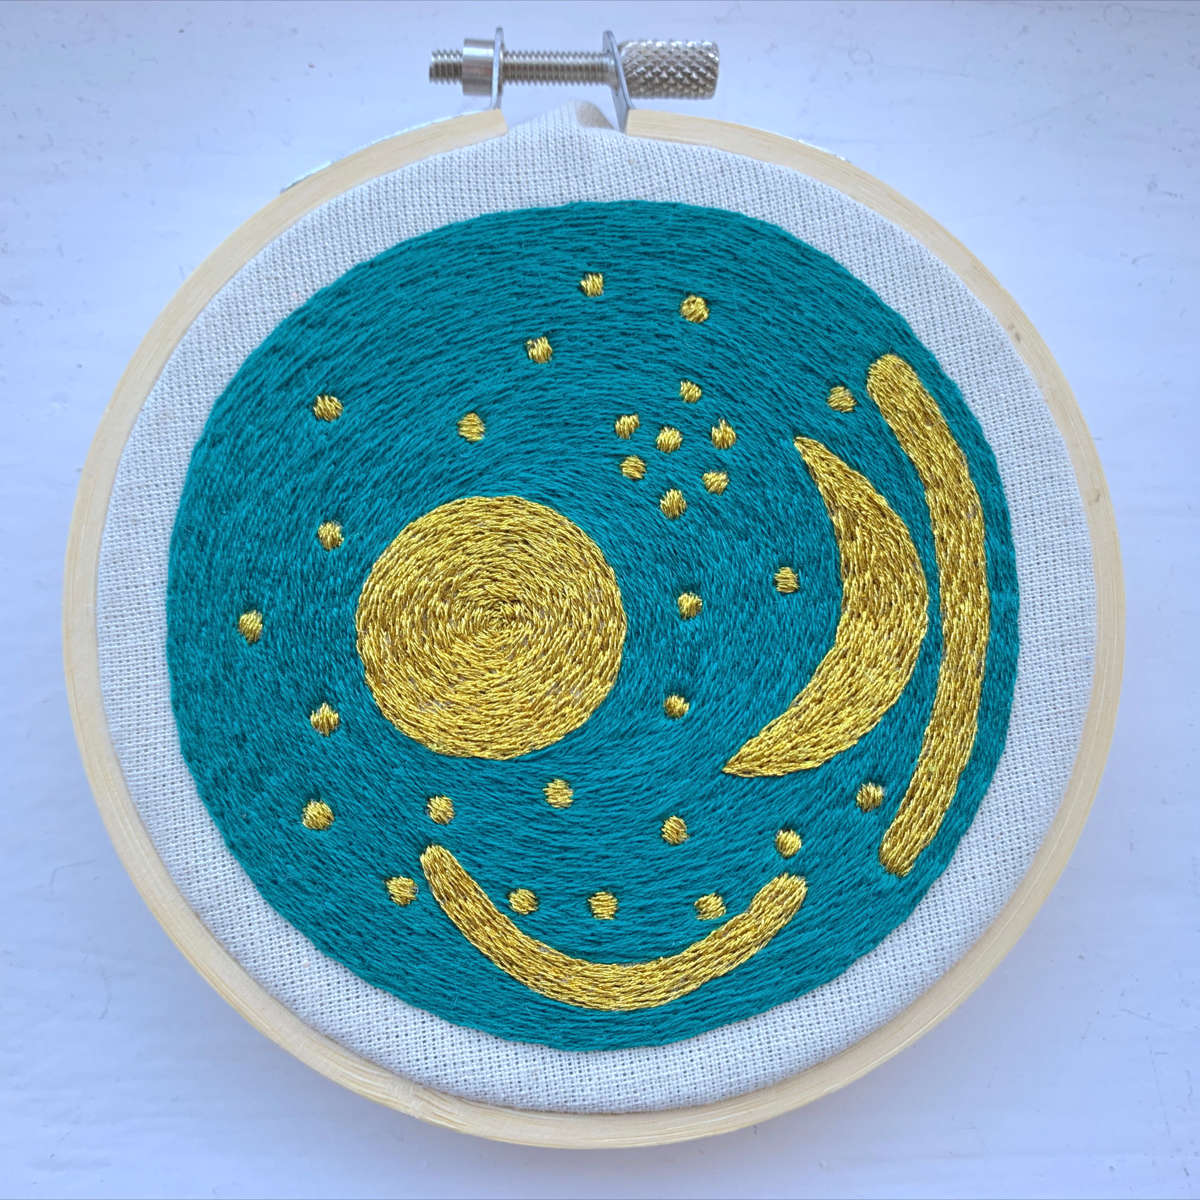 The Sky Disc as embroidery. © Lily Hawker-Yates.